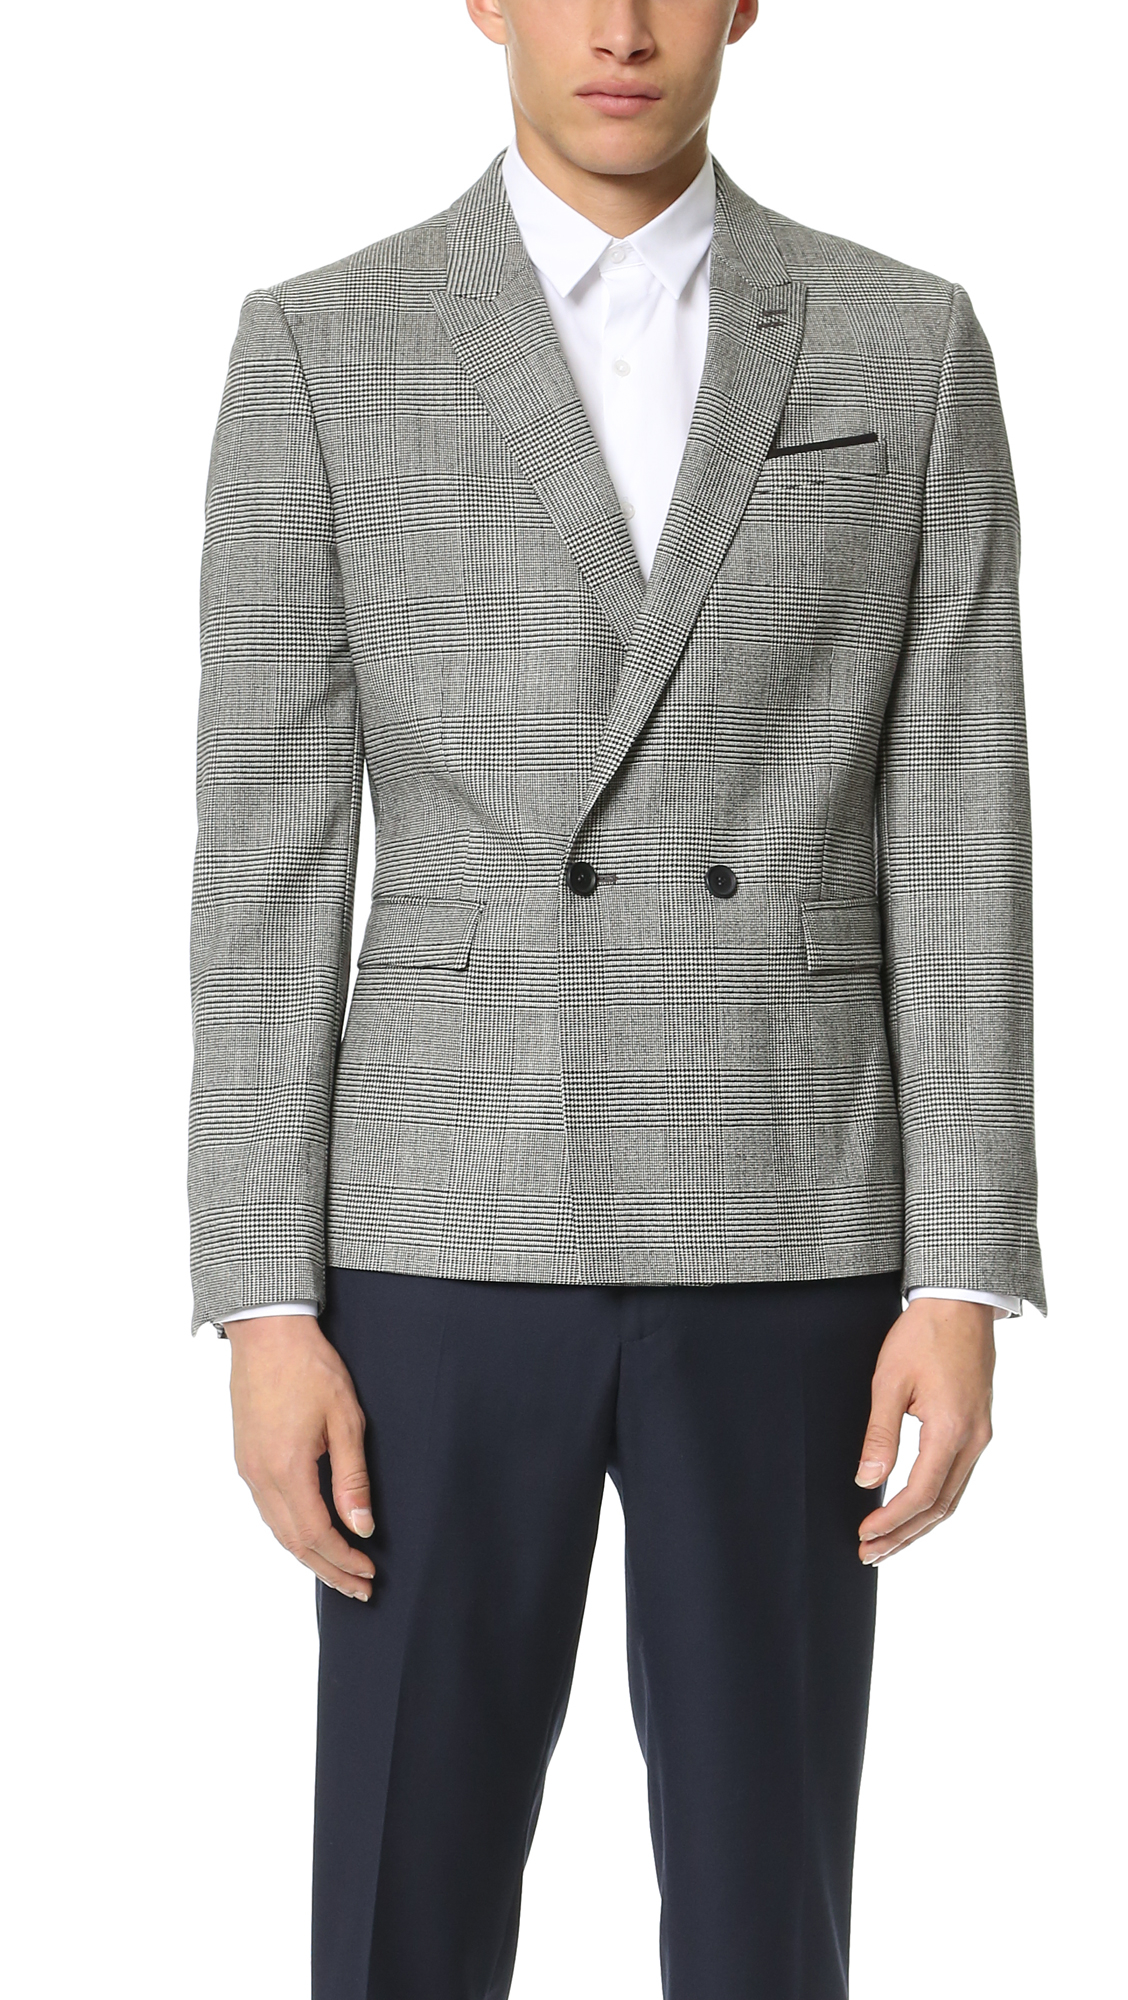 Lyst - The Kooples Double Breasted Prince Of Wales Check Jacket in ...